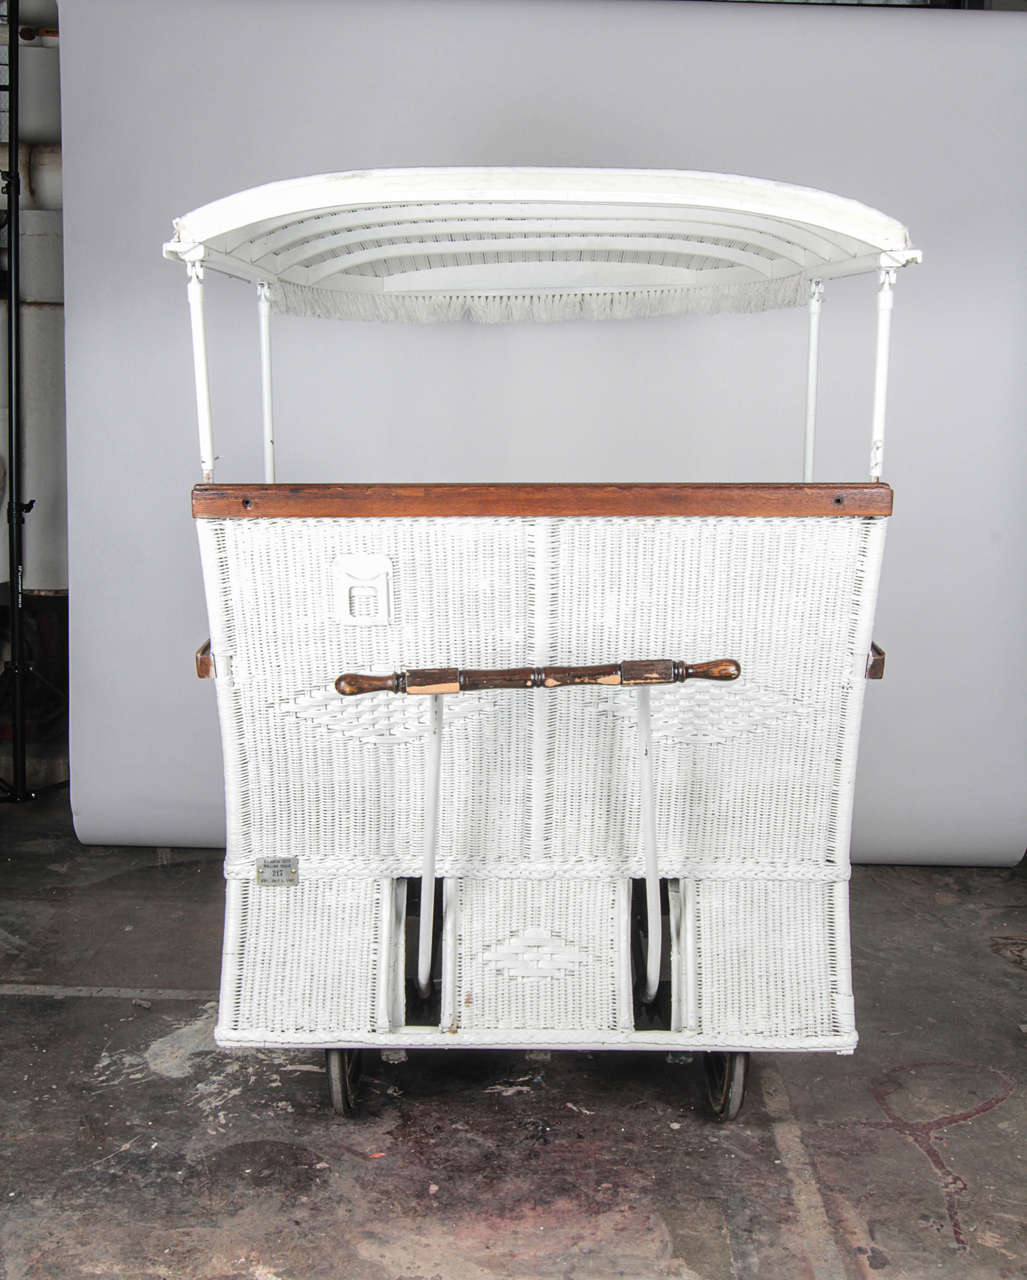 Atlantic City Wicker Rolling Chair #217 by Shill In Good Condition For Sale In New York, NY